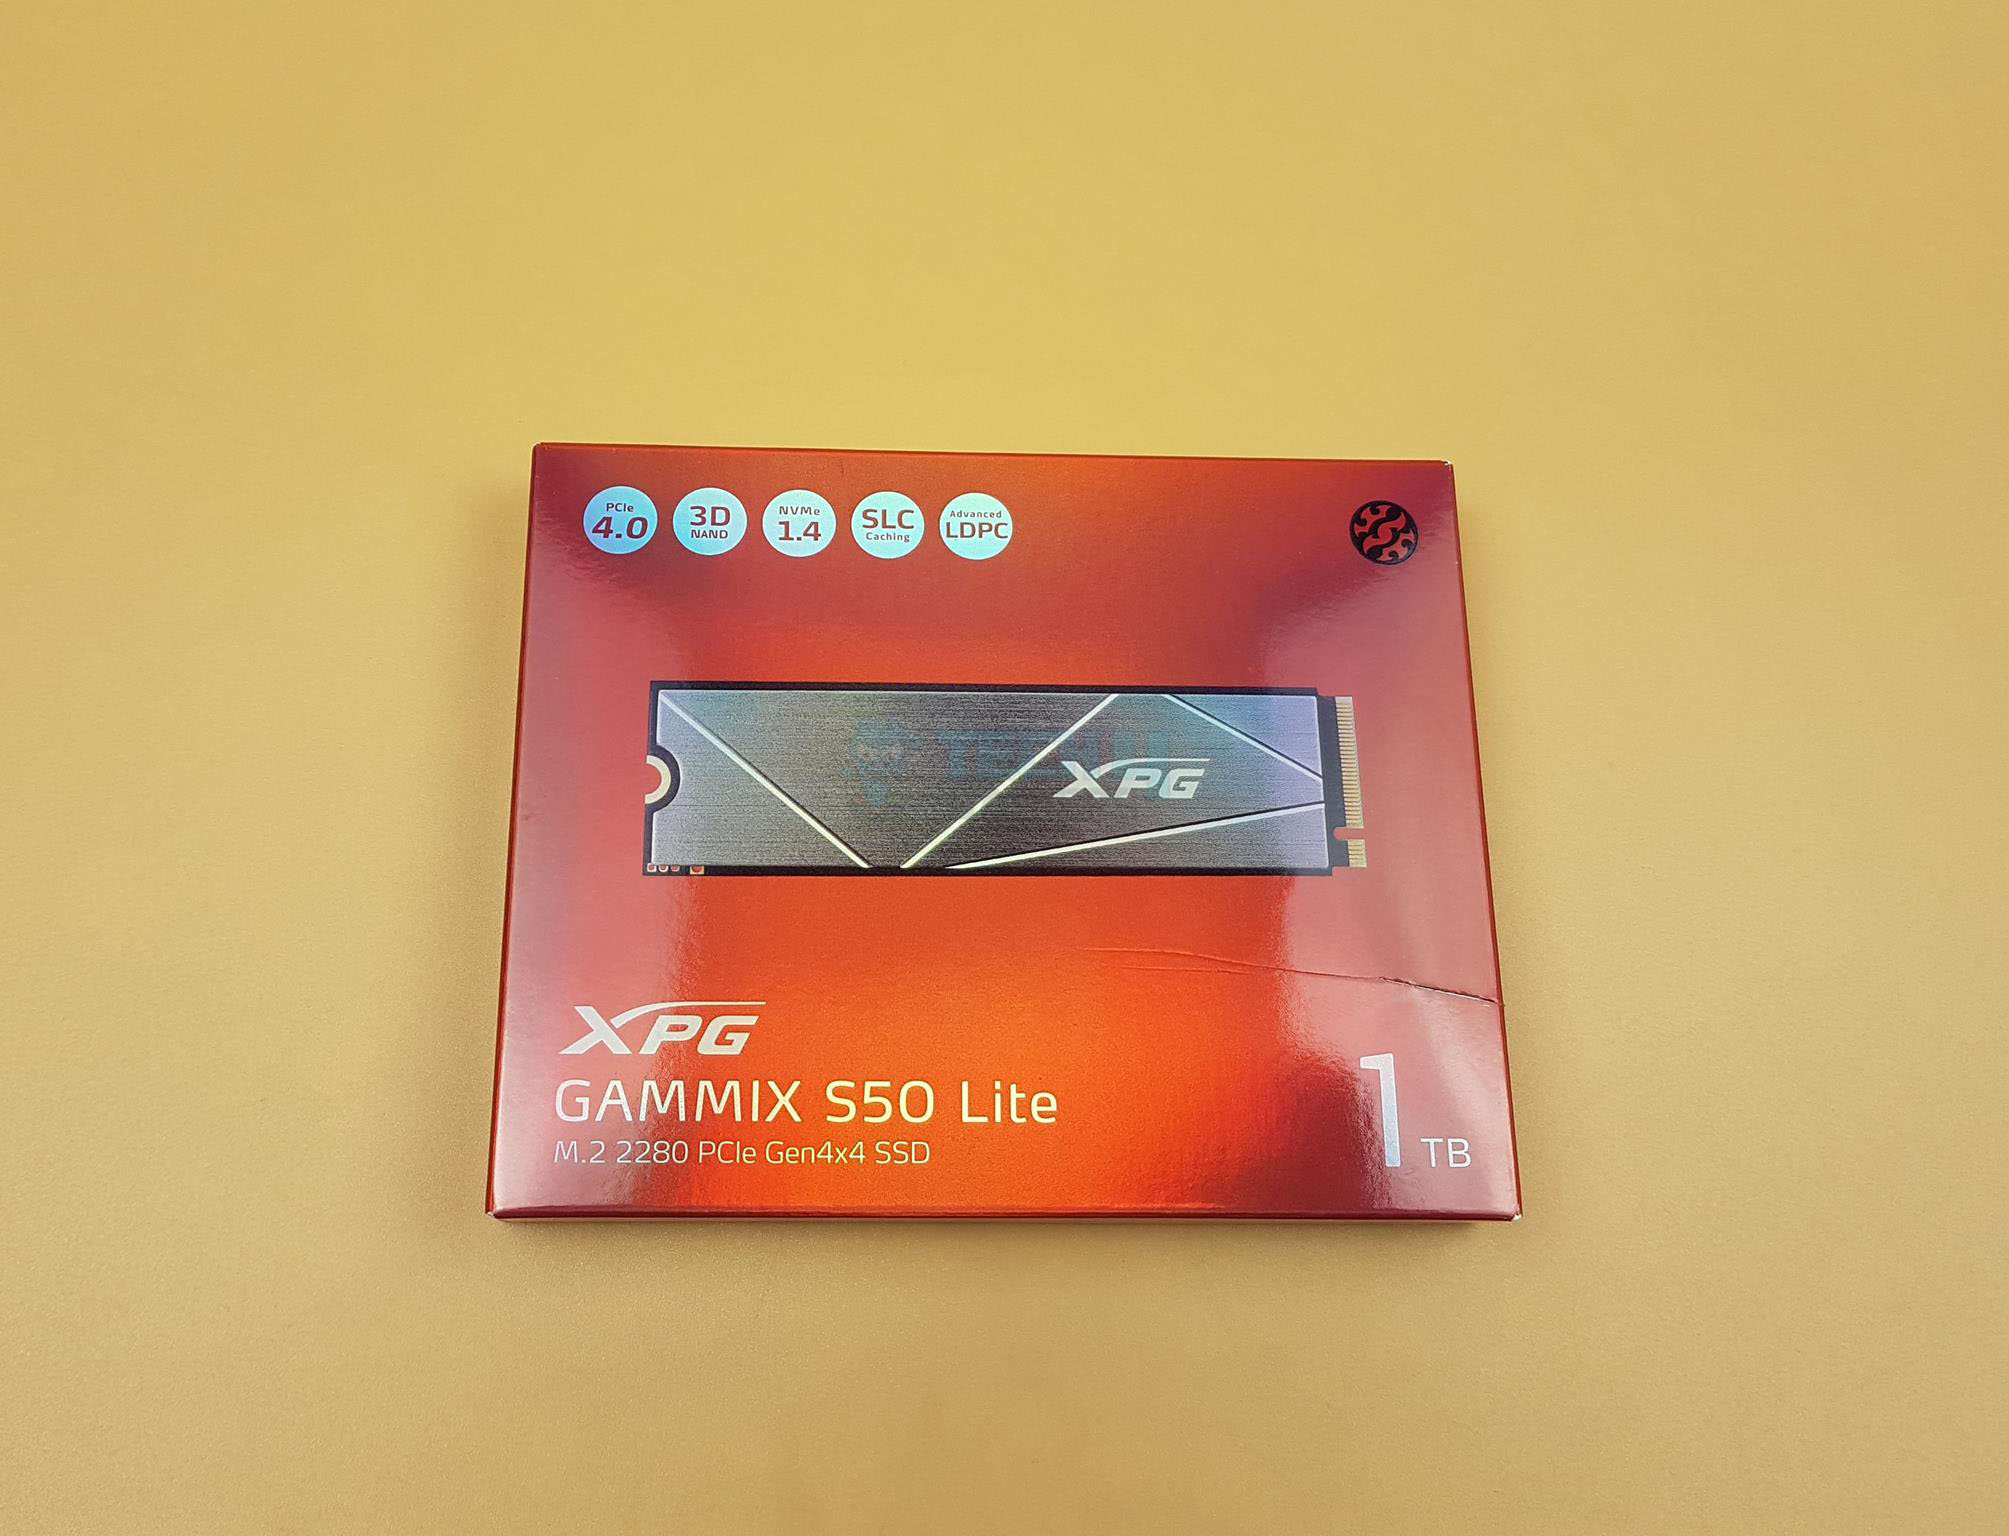 xpg gammix s50 lite Packaging and Unboxing